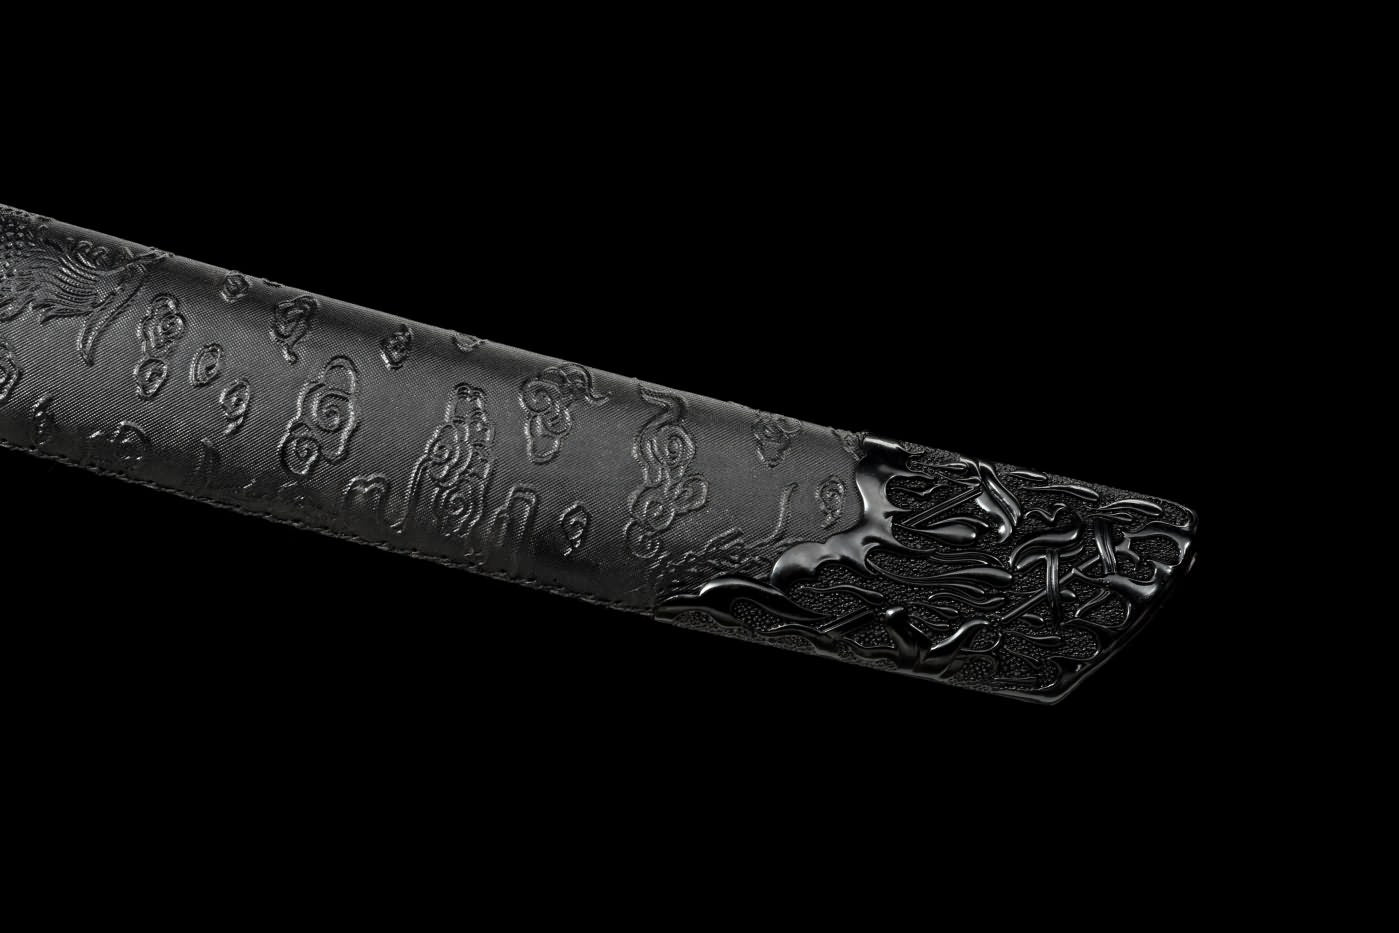 Dragon dao,Machetes Sword Real,Hand Forged Damascus Steel Blade,Alloy Fittings,LOONGSWORD